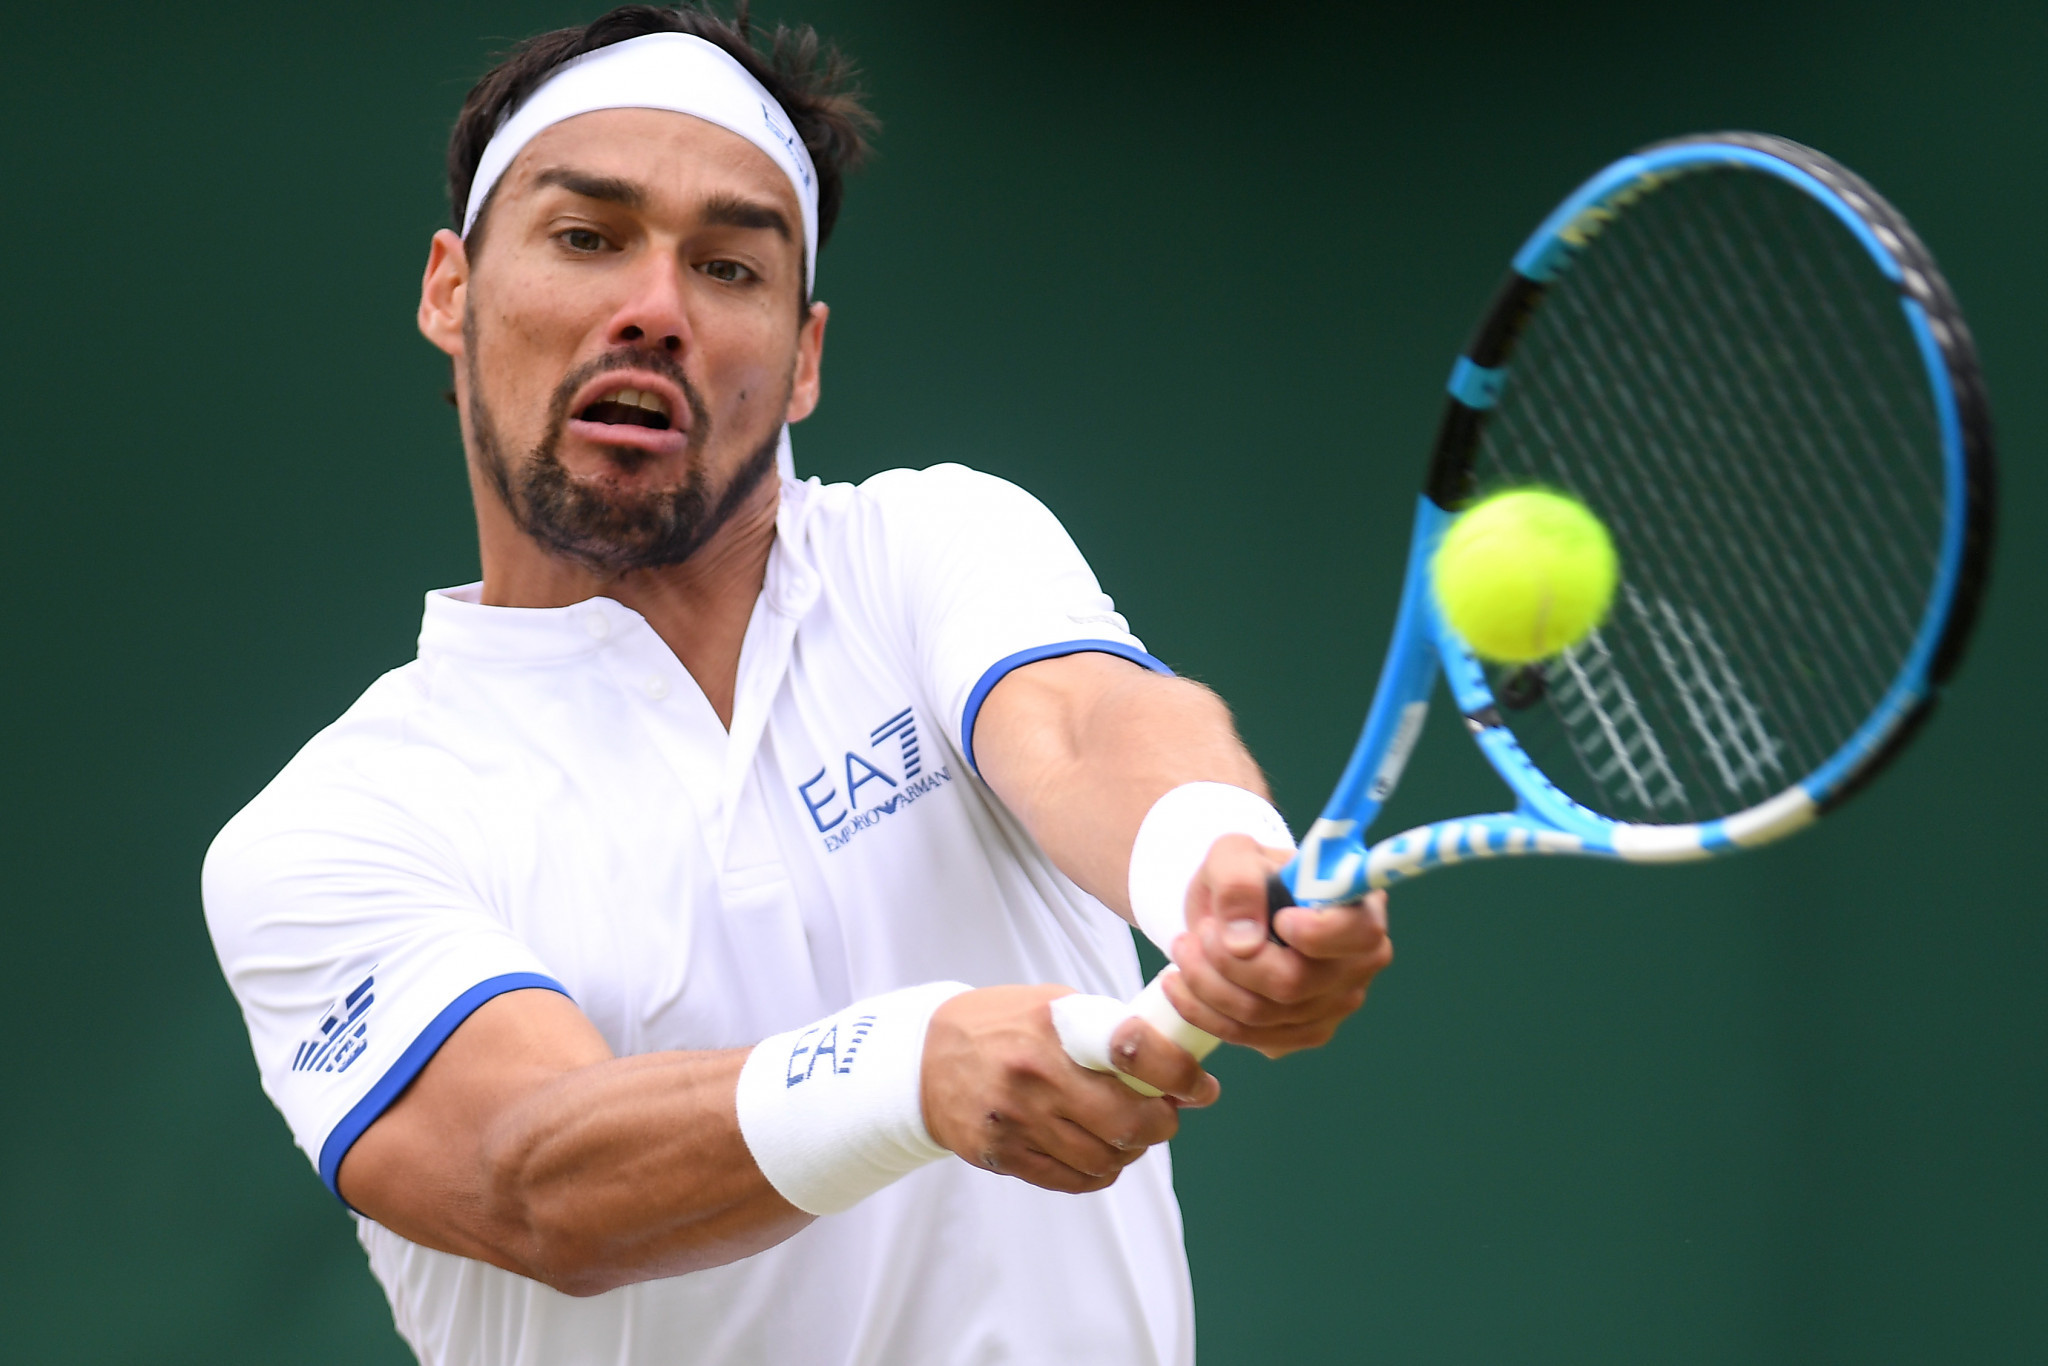 Fabio Fognini apologised for a comment he made during his defeat to Tennys Sandgren ©Getty Images